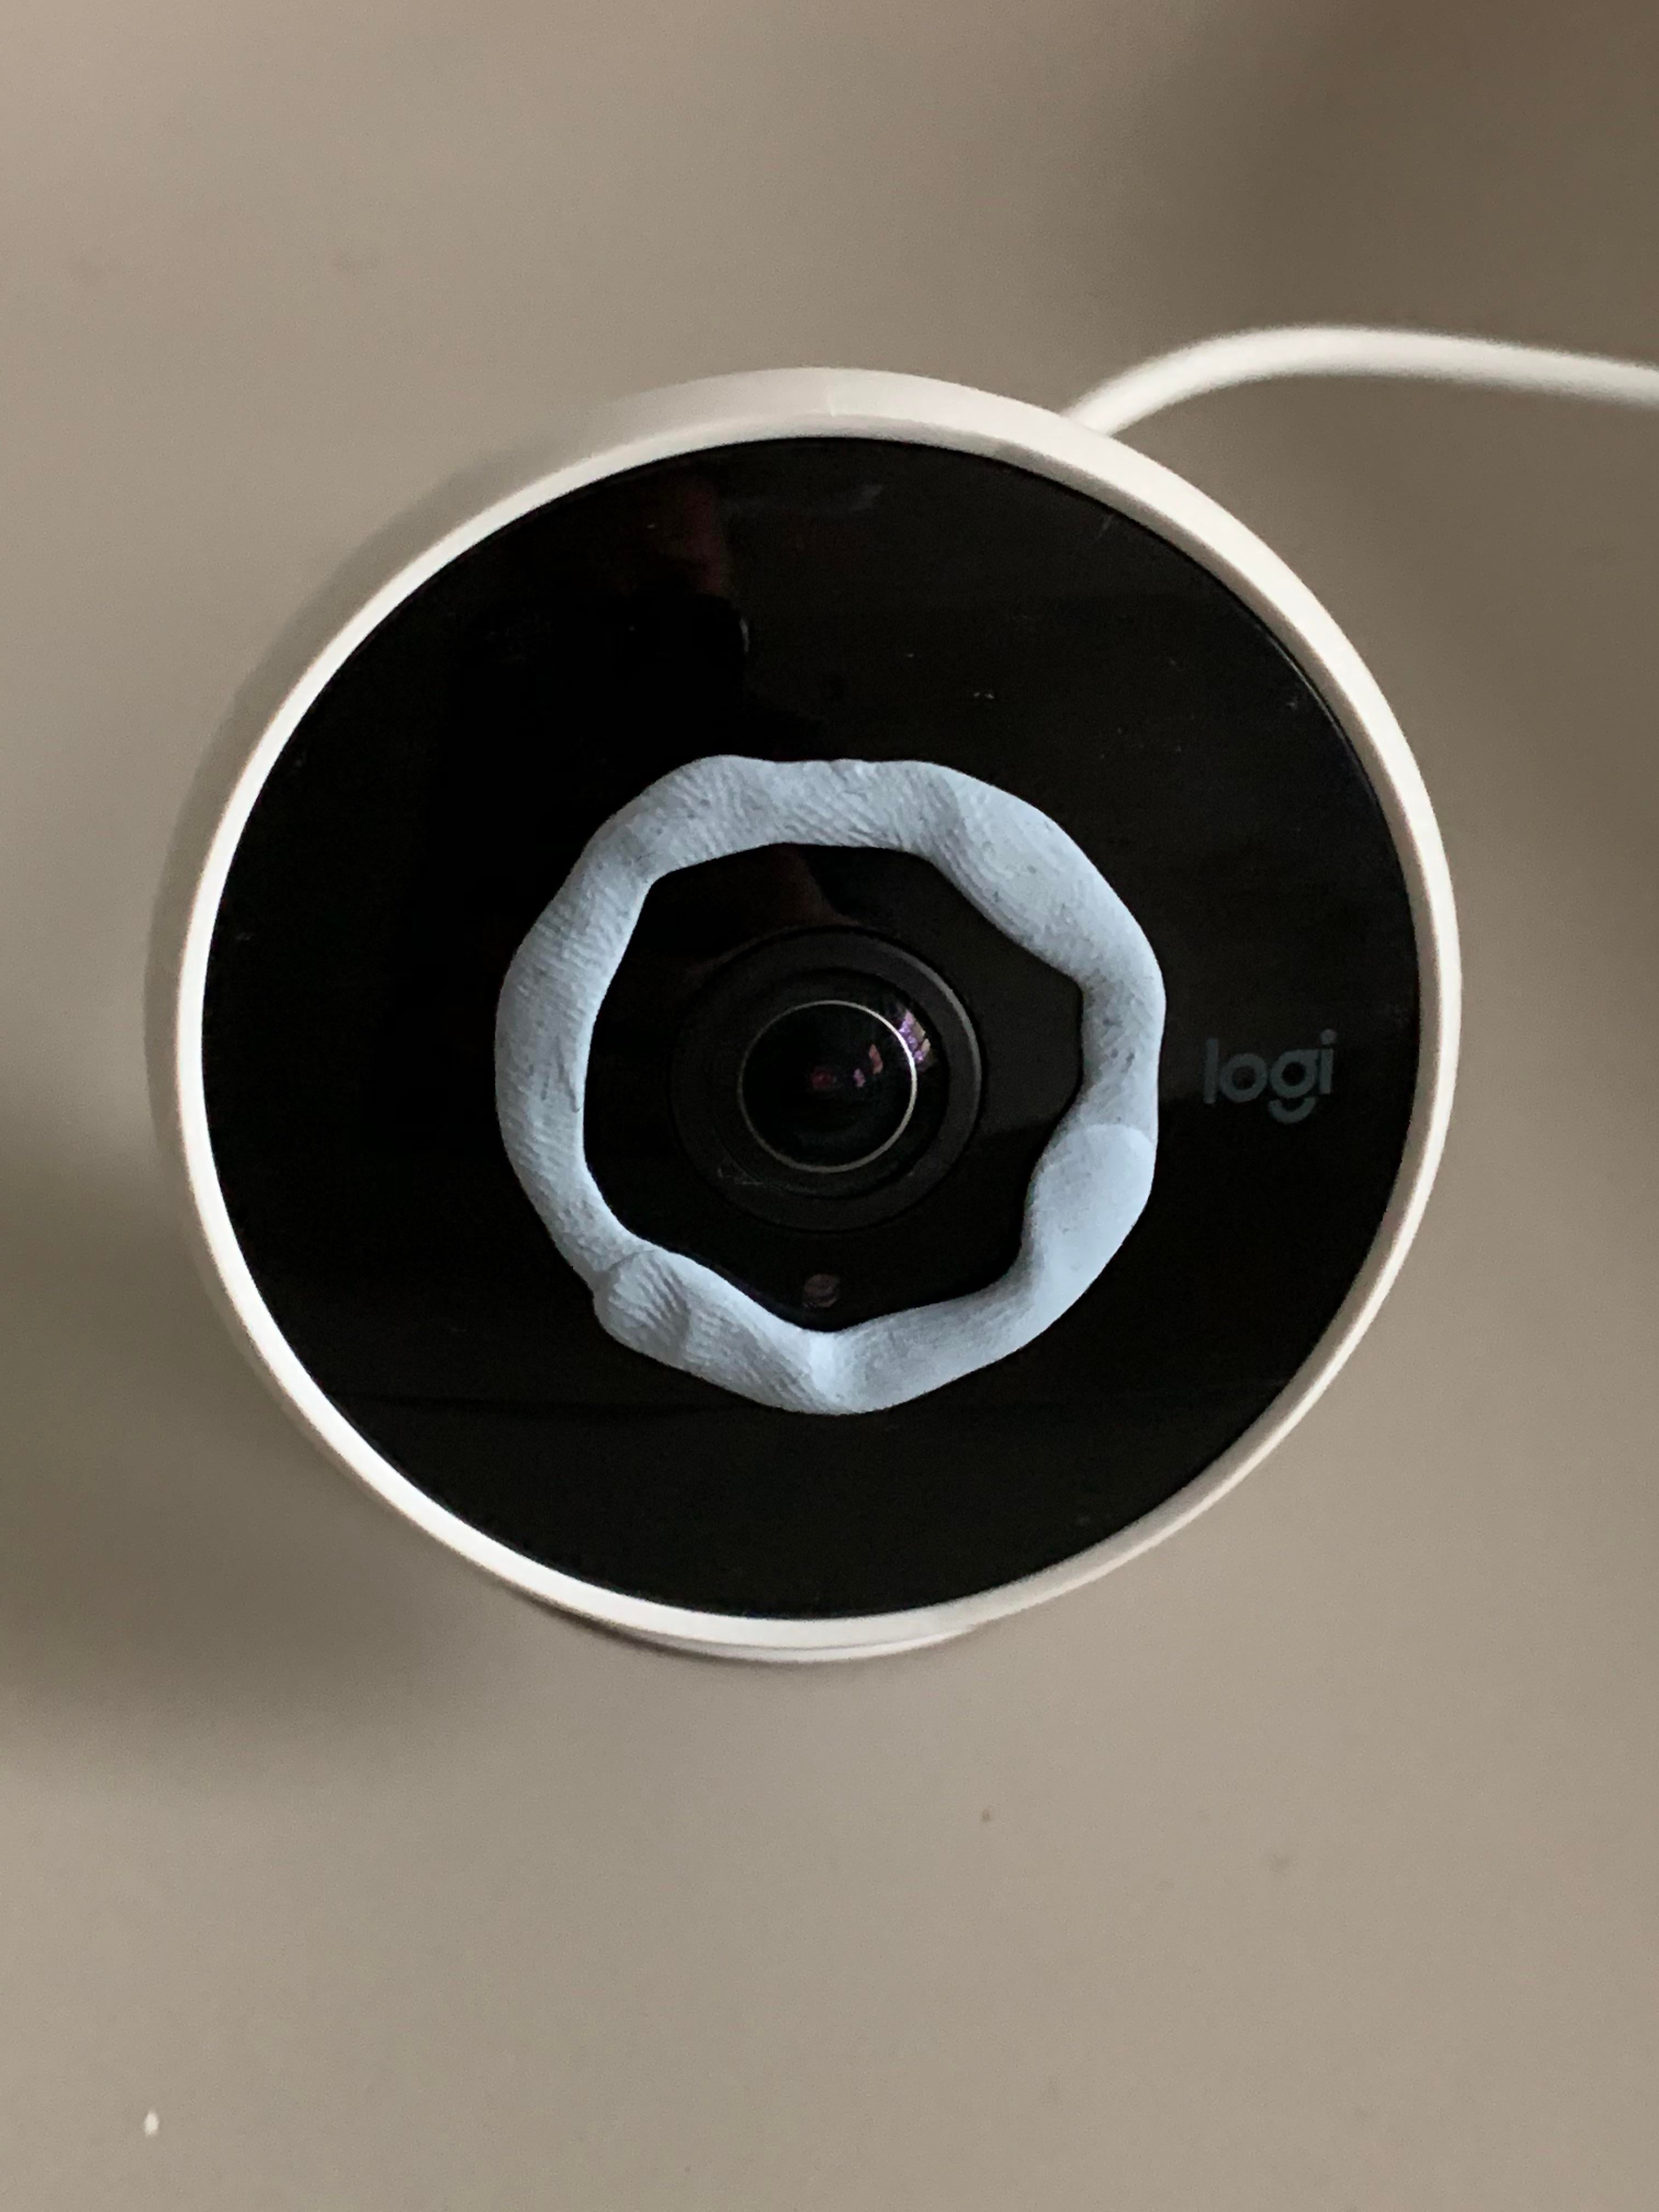 I found a solution to hide the Logi Circle 2